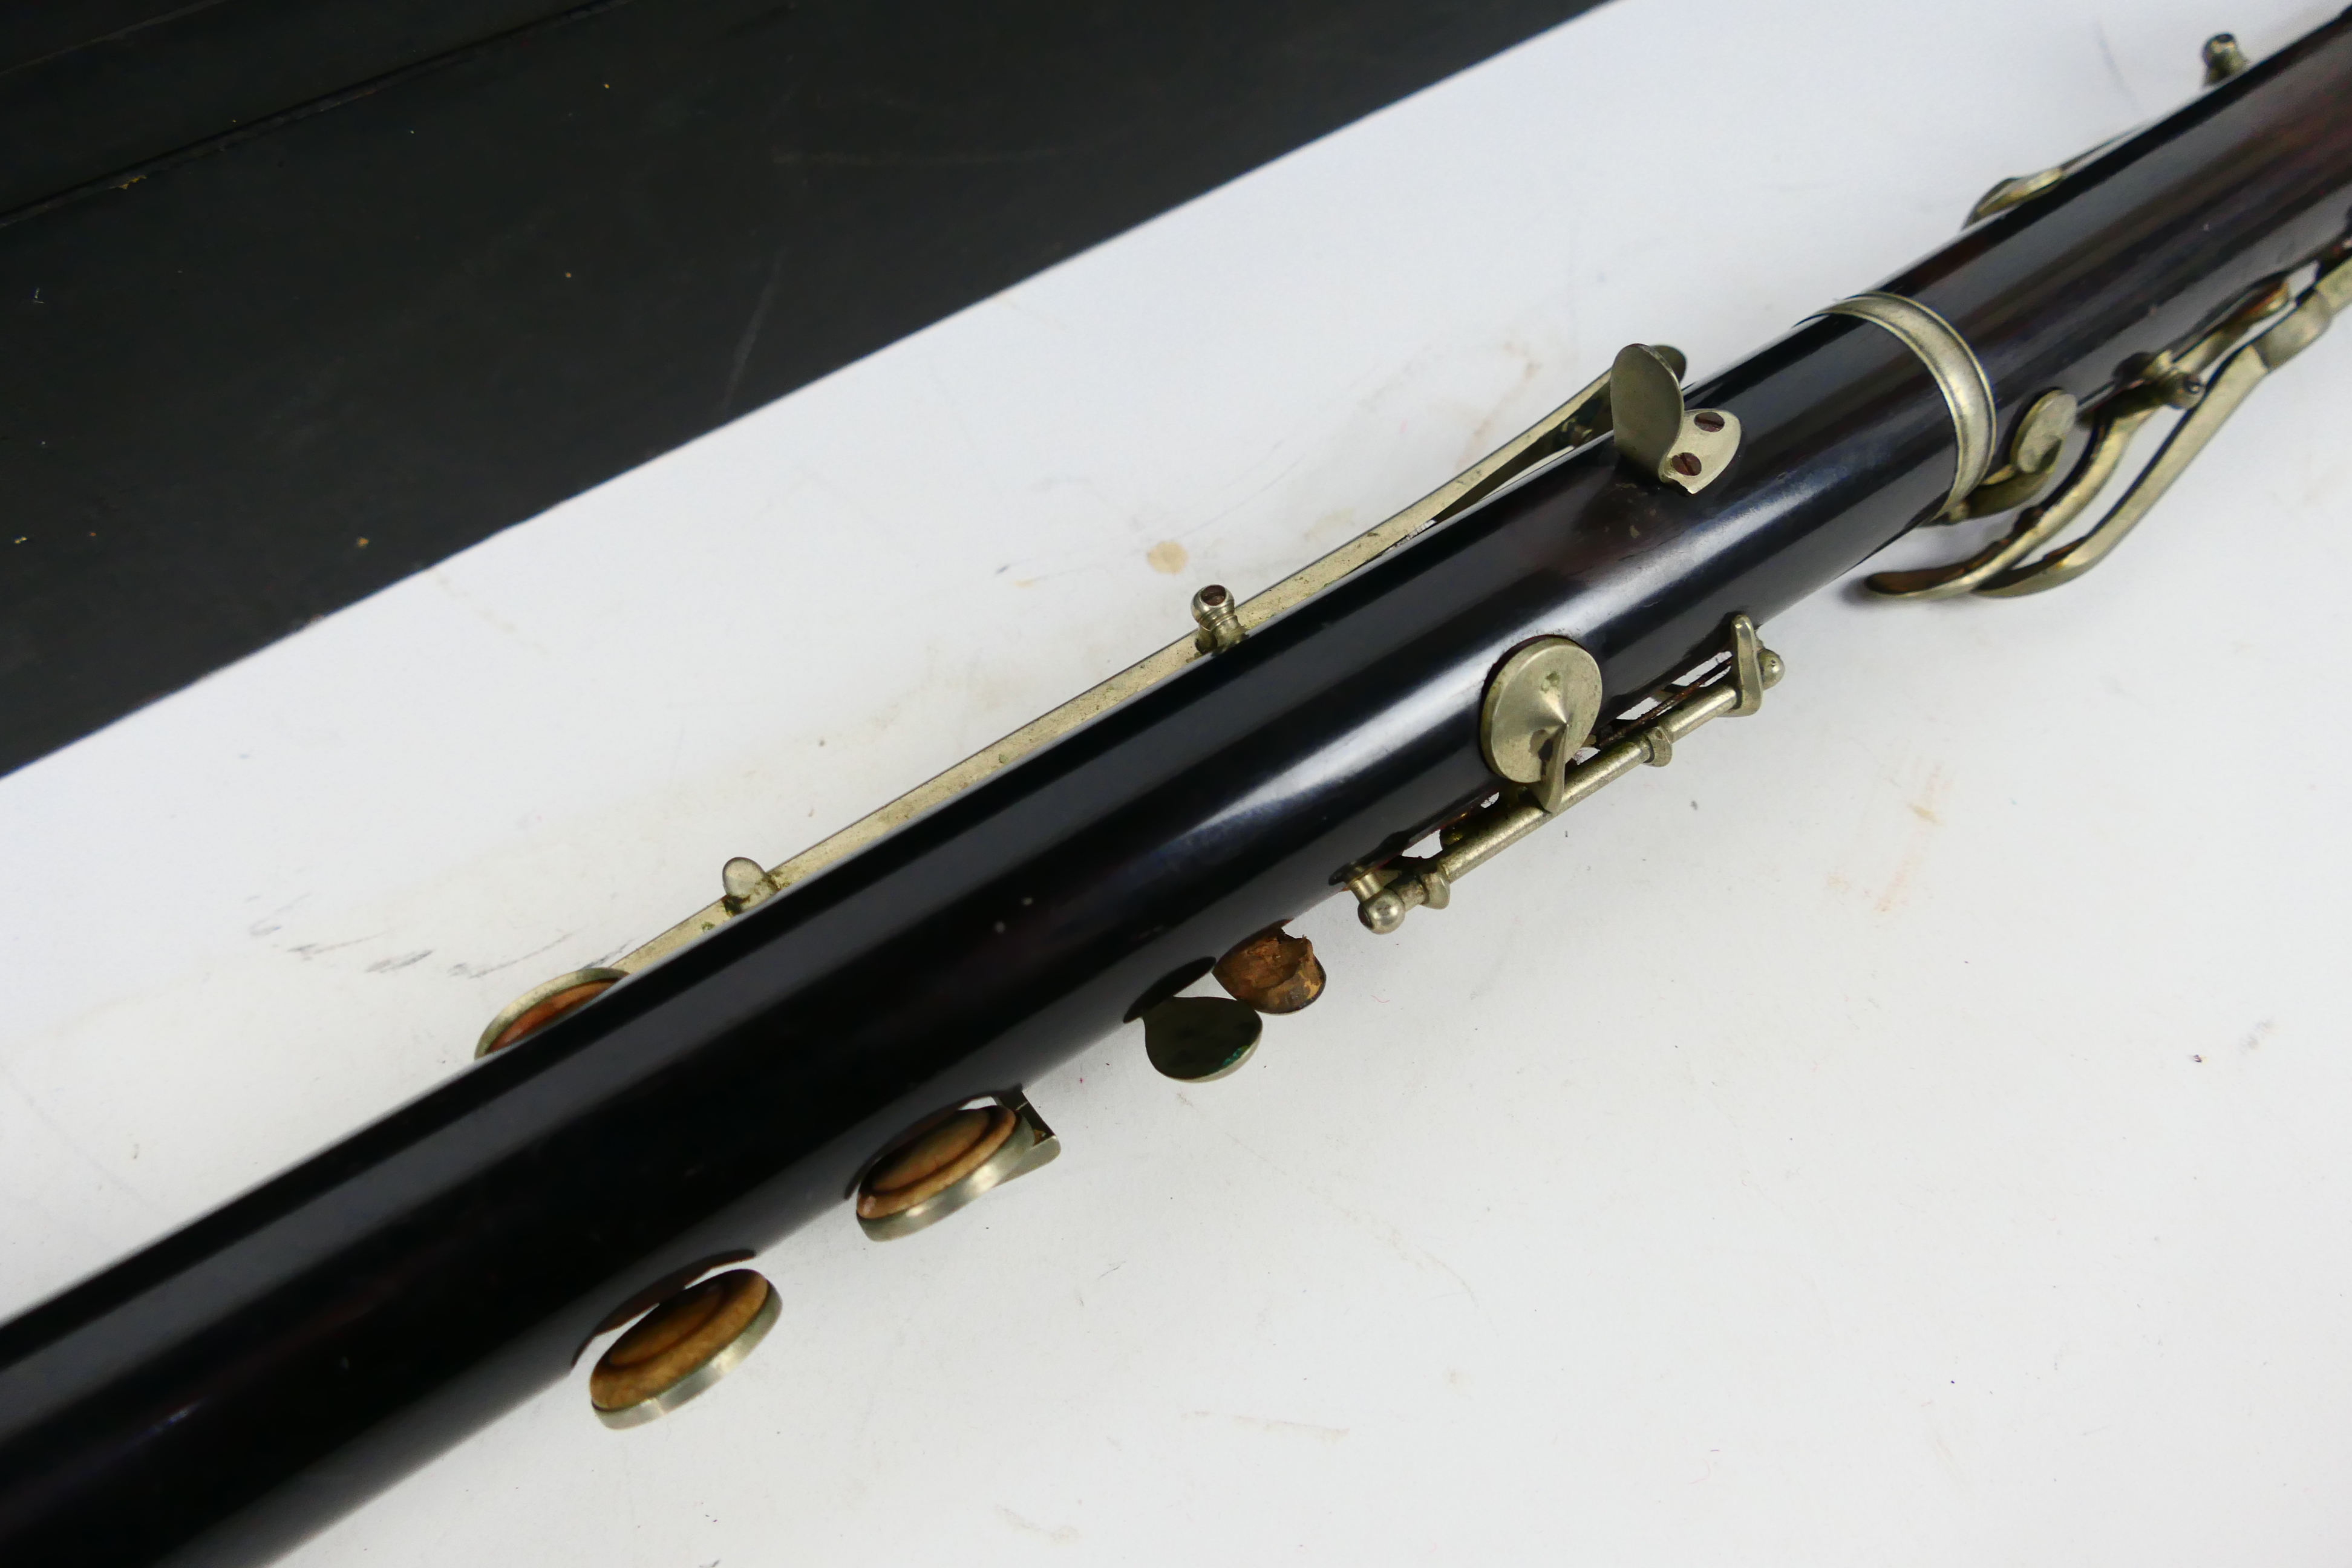 Clarinet. An unbranded clarinet, 65cm in length. - Image 6 of 7